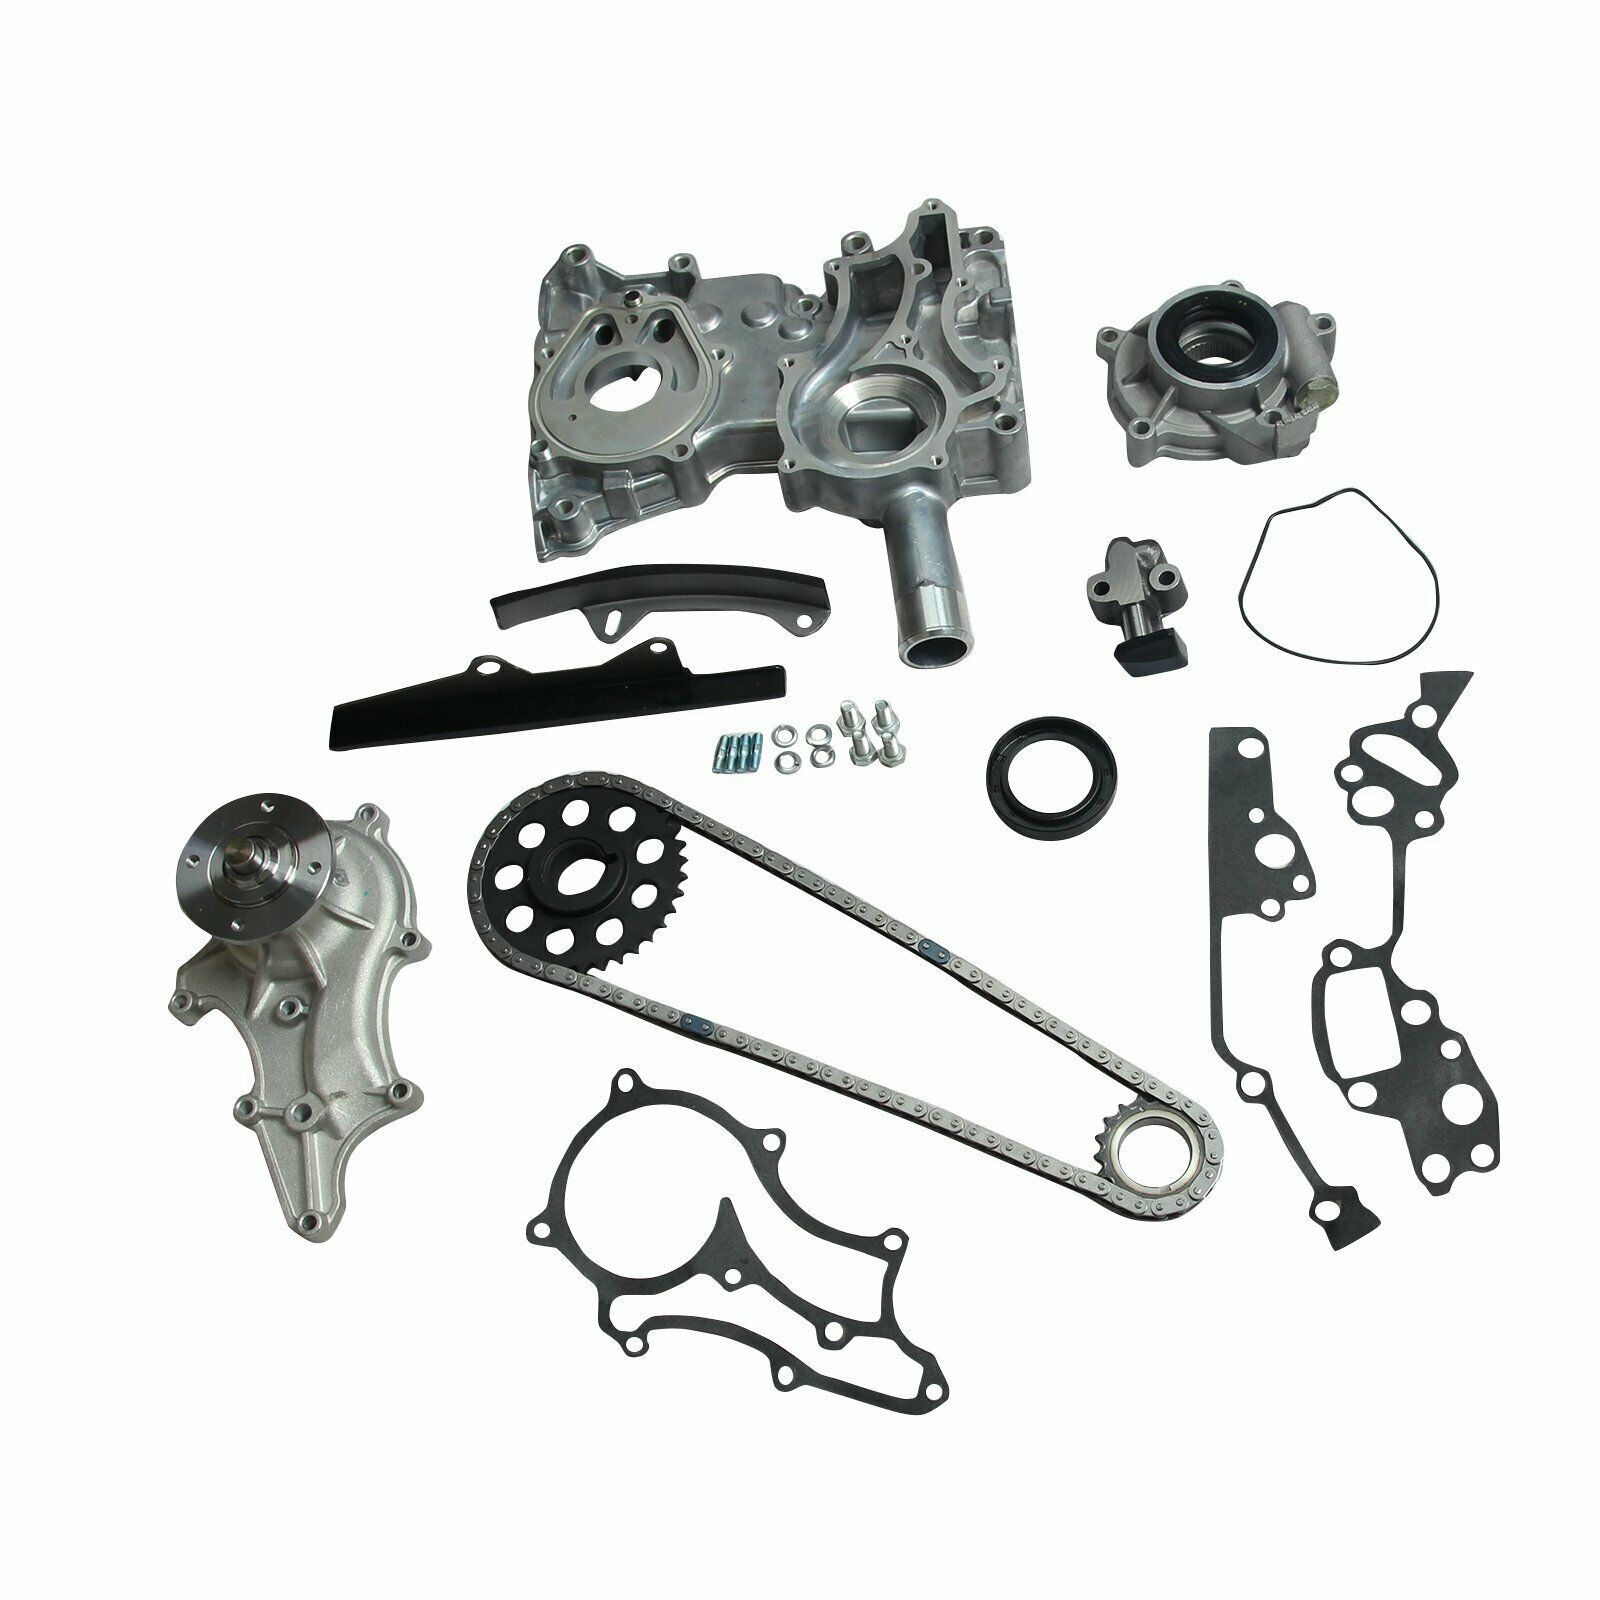 Timing Chain Kit + Cover + Oil & Water Pump 22R 22RE Fits 85-95 Toyota 2.4L